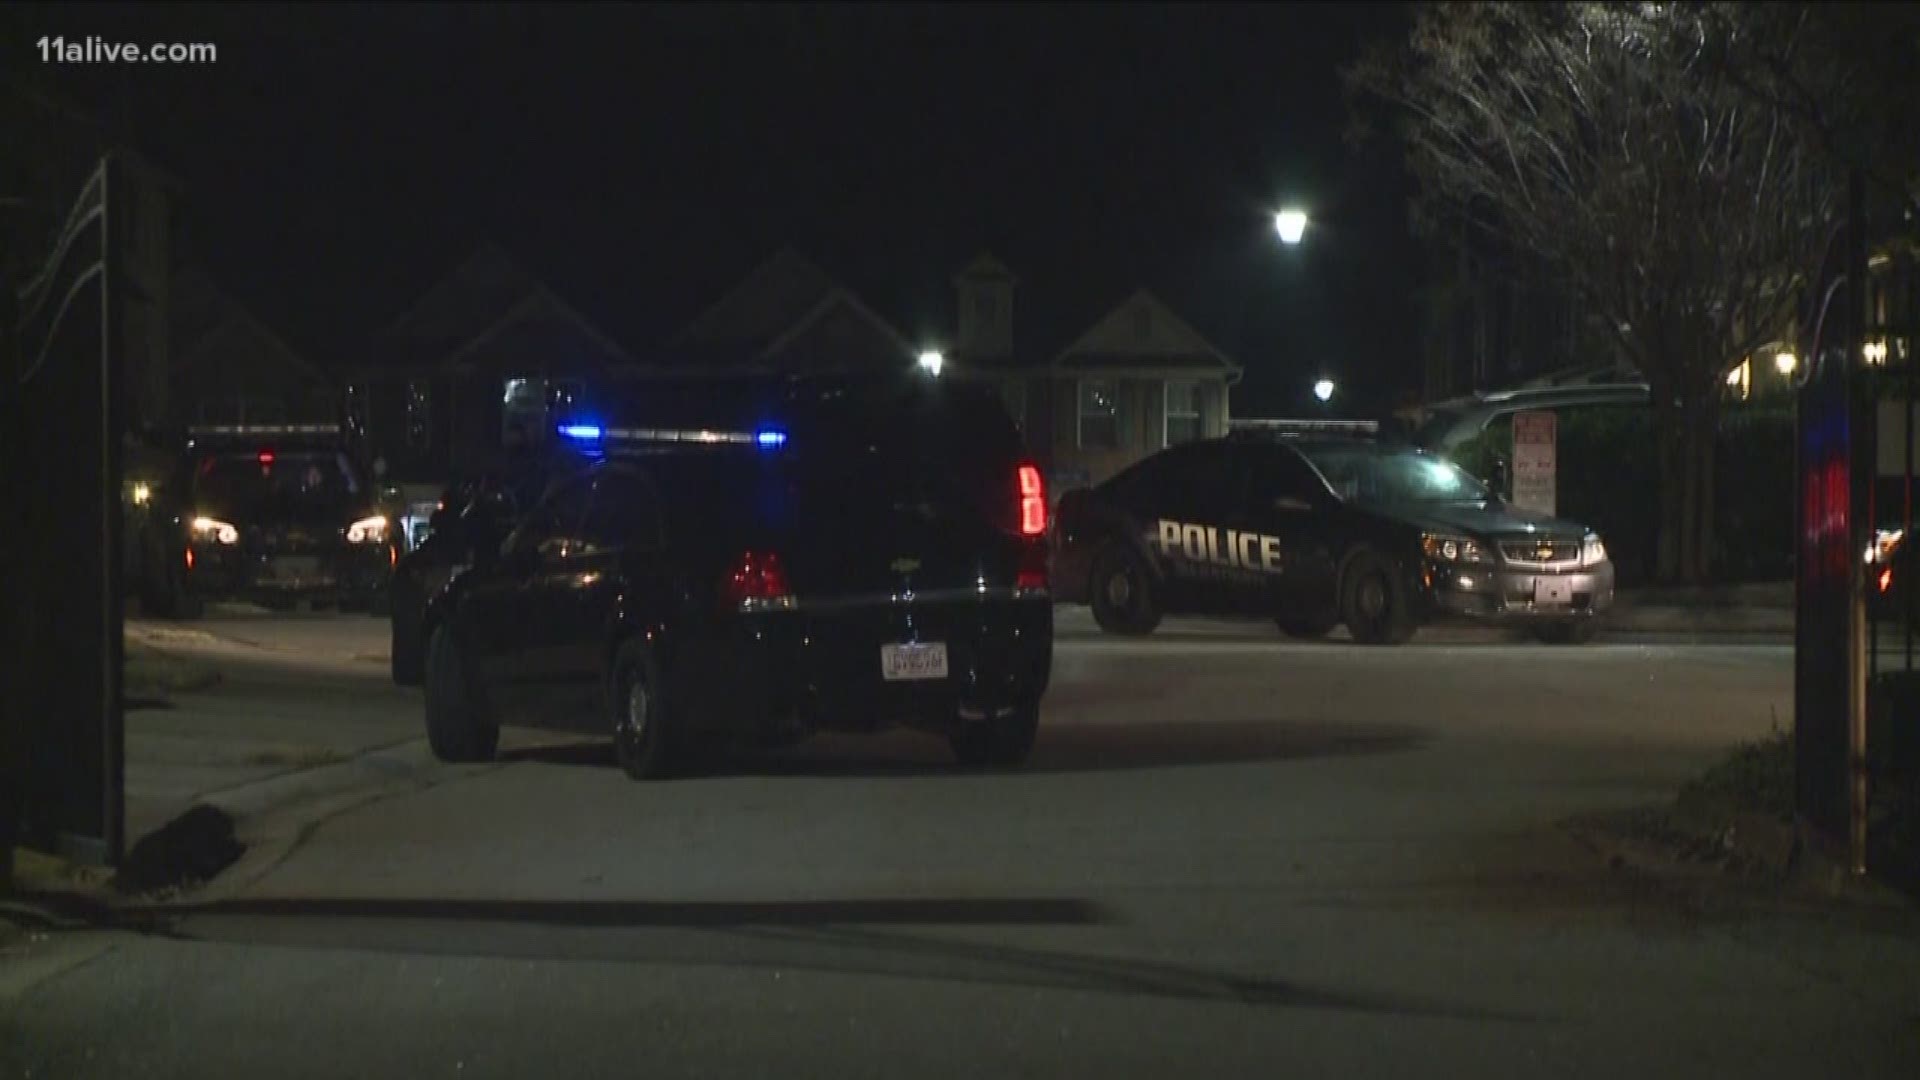 Officers responded to a domestic incident call at a condo complex in DeKalb County. When they arrived, they found an armed man holding a woman at gunpoint. Once inside, they discovered the woman with a gunshot wound.